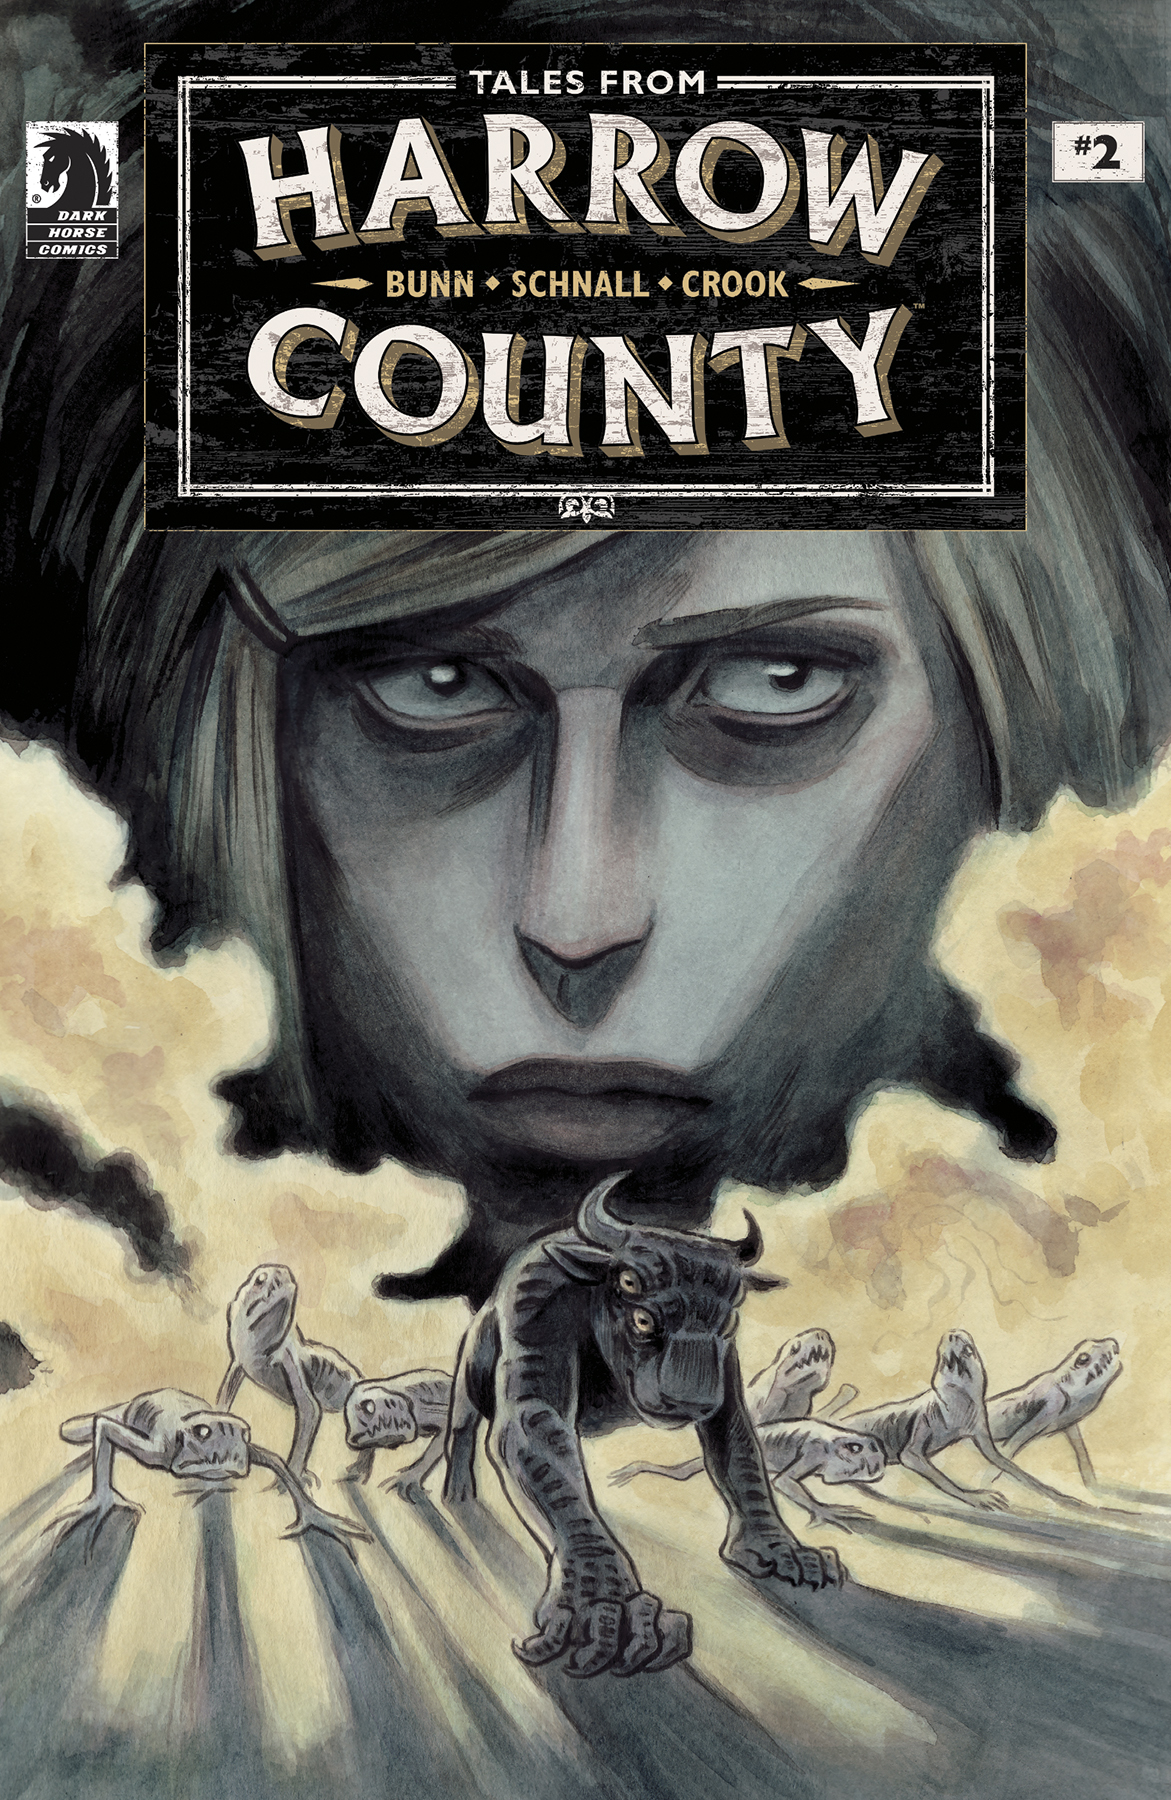 Tales From Harrow County Lost Ones #2 Cover A Schnall (Of 4)